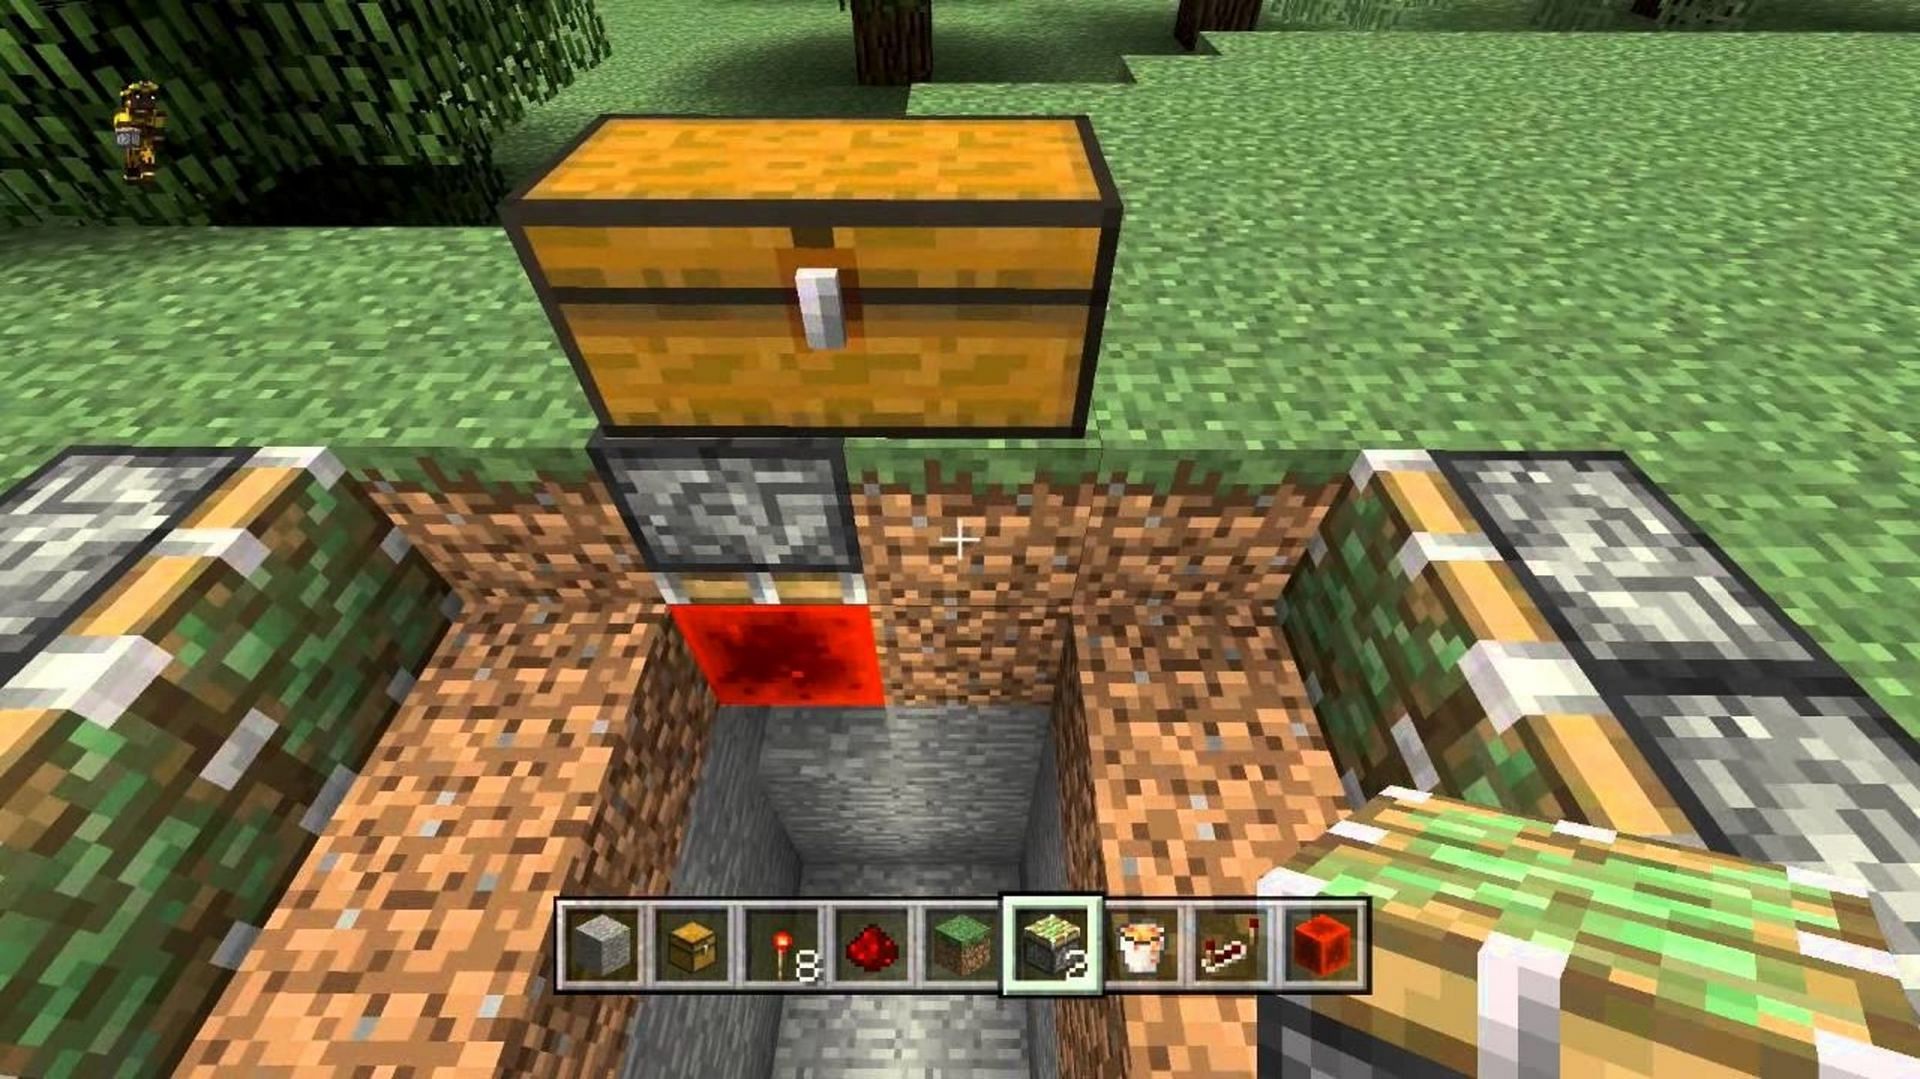 This trap should keep players&#039; valuables intact (Image via Puredominance/YouTube)